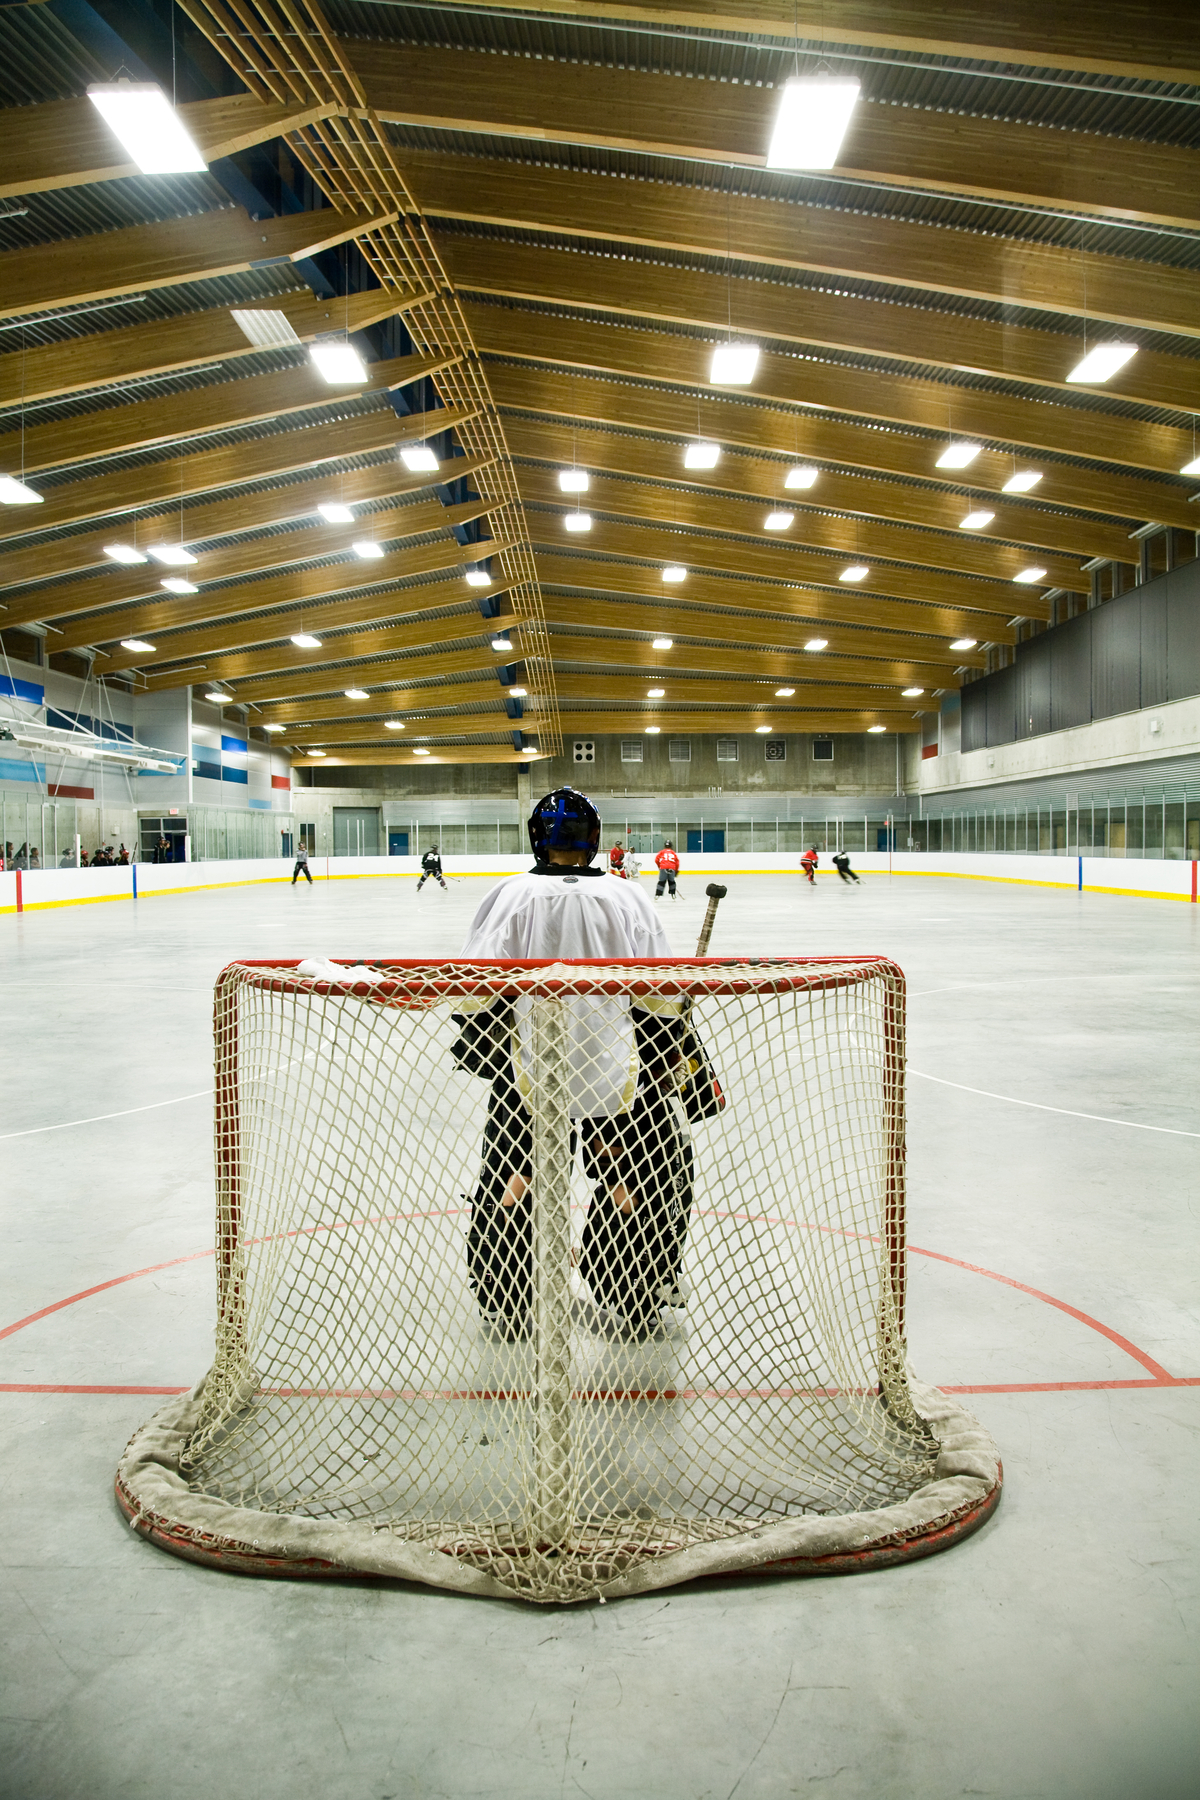 Interior view of Trout Lake Ice Rink showing hockey practice from perspective of goalie, all under the Glue-laminated timber (glulam) roof design which affords natural ventilation and lighting